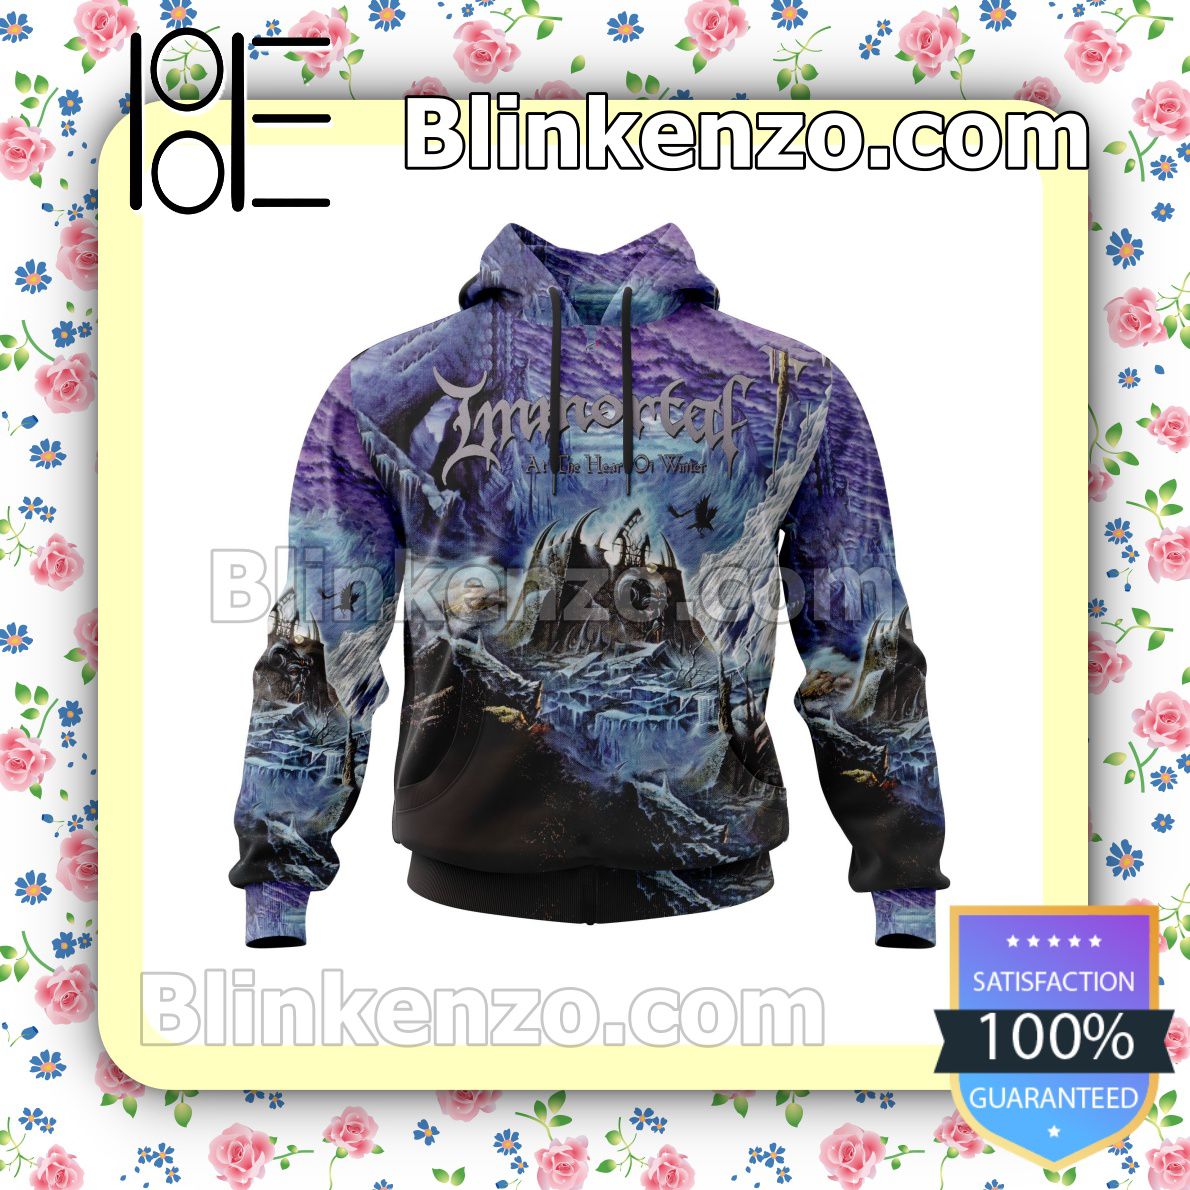 Personalized Immortal At The Heart Of Winter Album Cover Hooded Sweatshirt